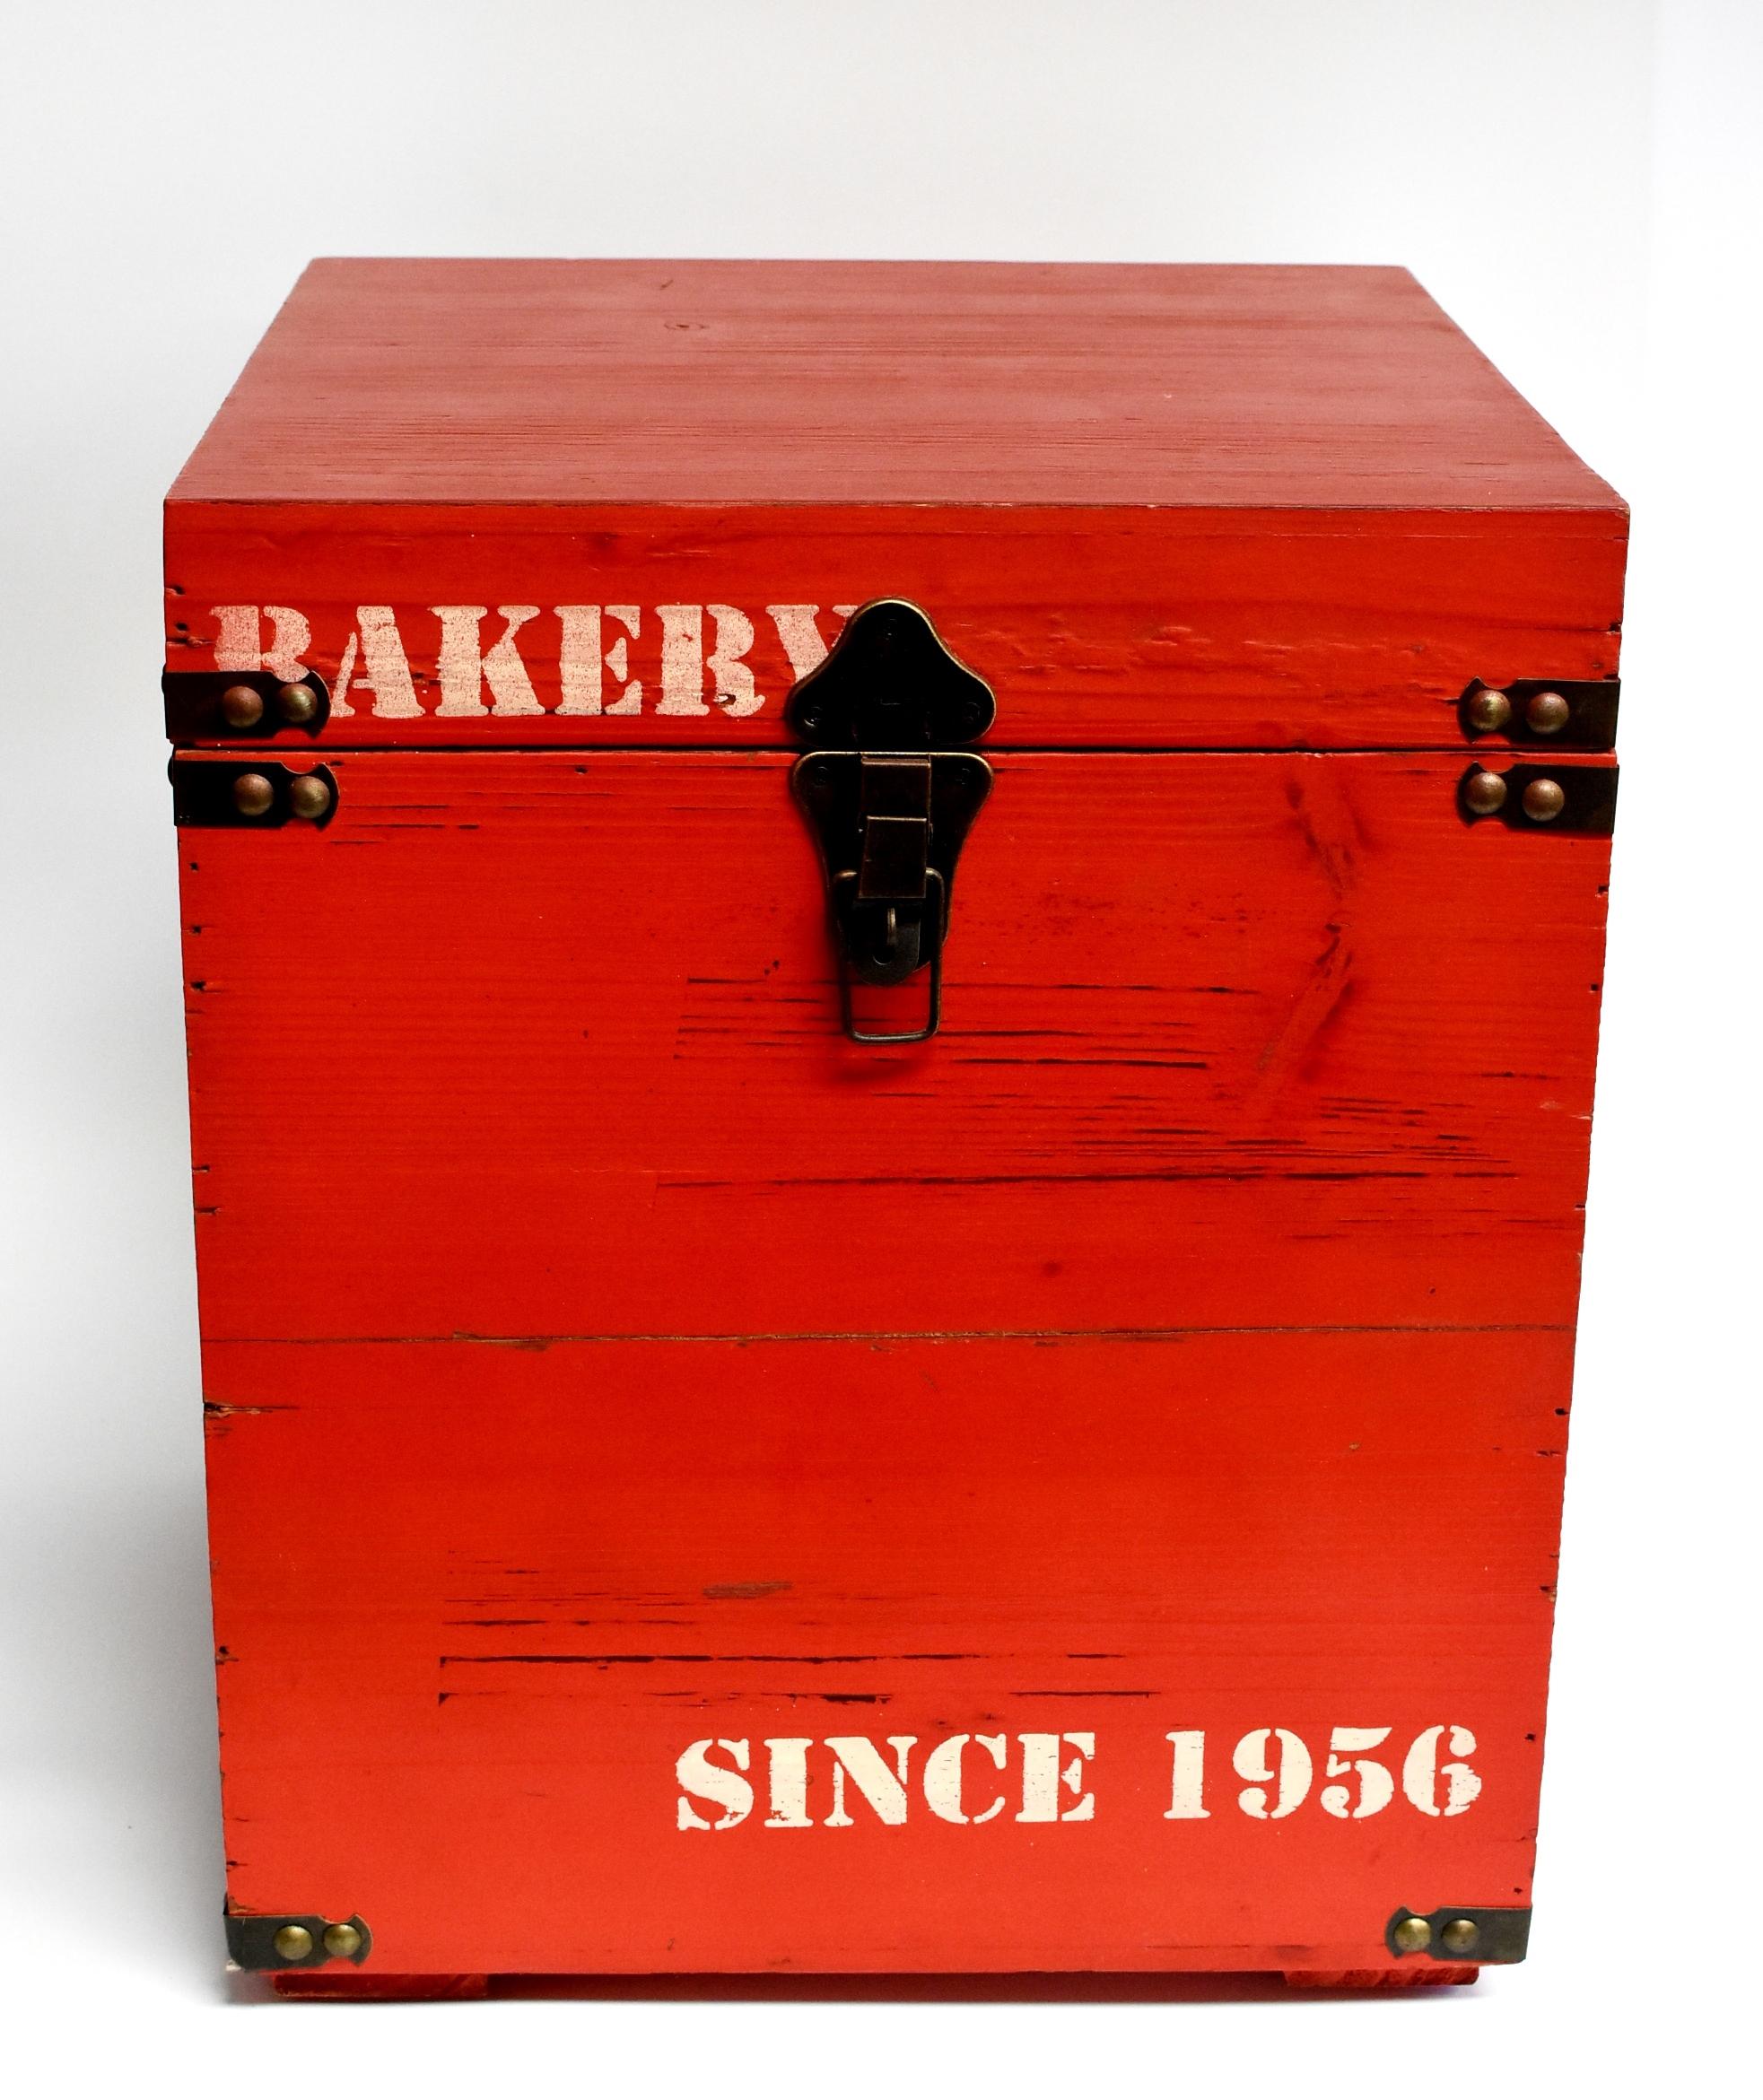 A brand new wooden box painted in beautiful red color. White stenciled 